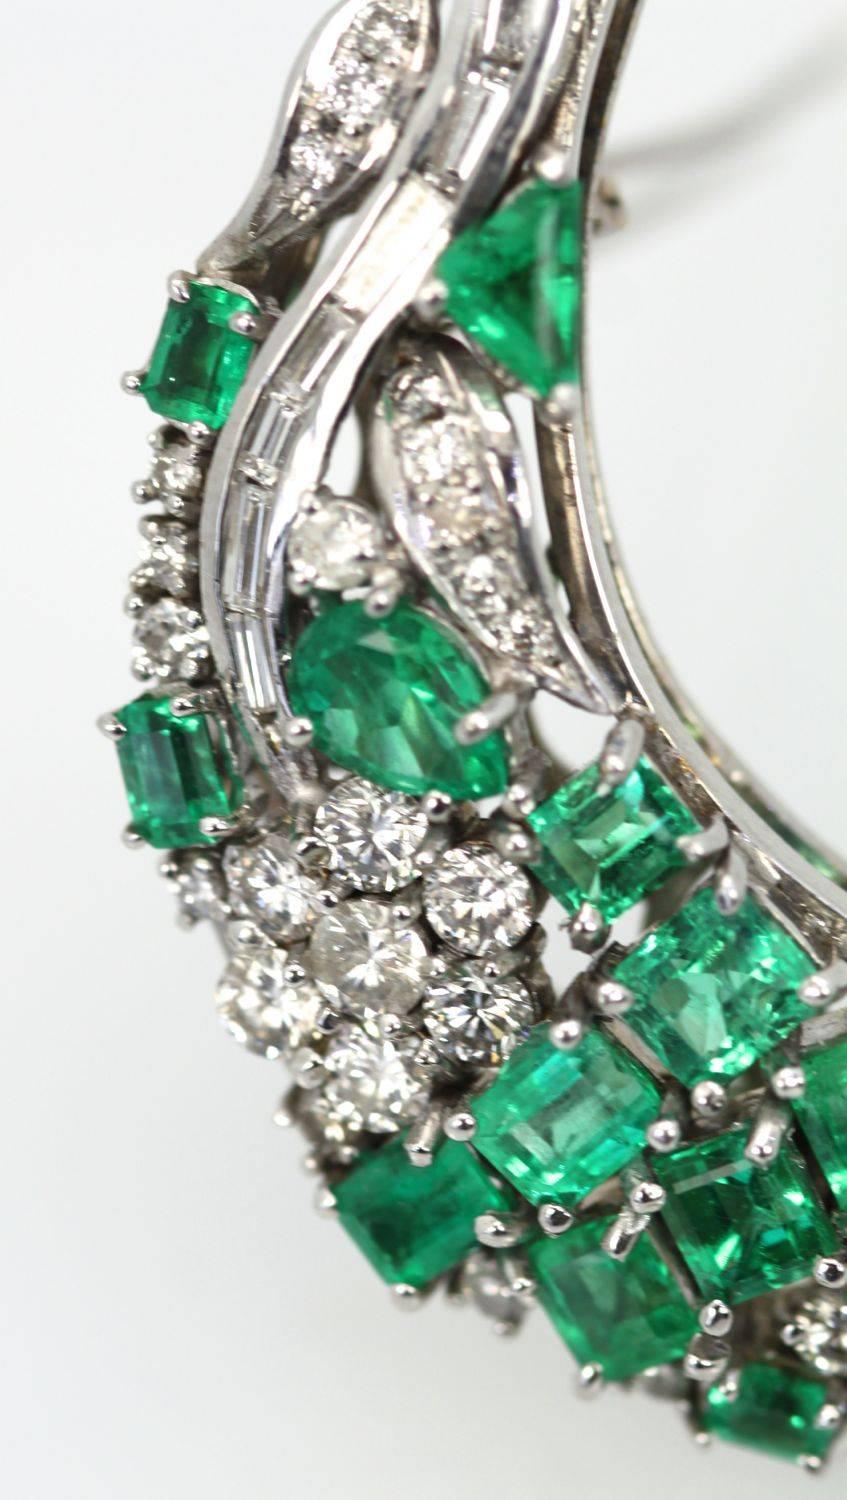 This crescent brooch is made up of 7.52 Carats of Emeralds and 3.34 Carats of Diamonds in a large C shape brooch.
There are 4.95 carats of emerald cut Emeralds, 1.95 carats of oval Emeralds and Triangle Emeralds 0.62 carats.
The Diamonds round cuts